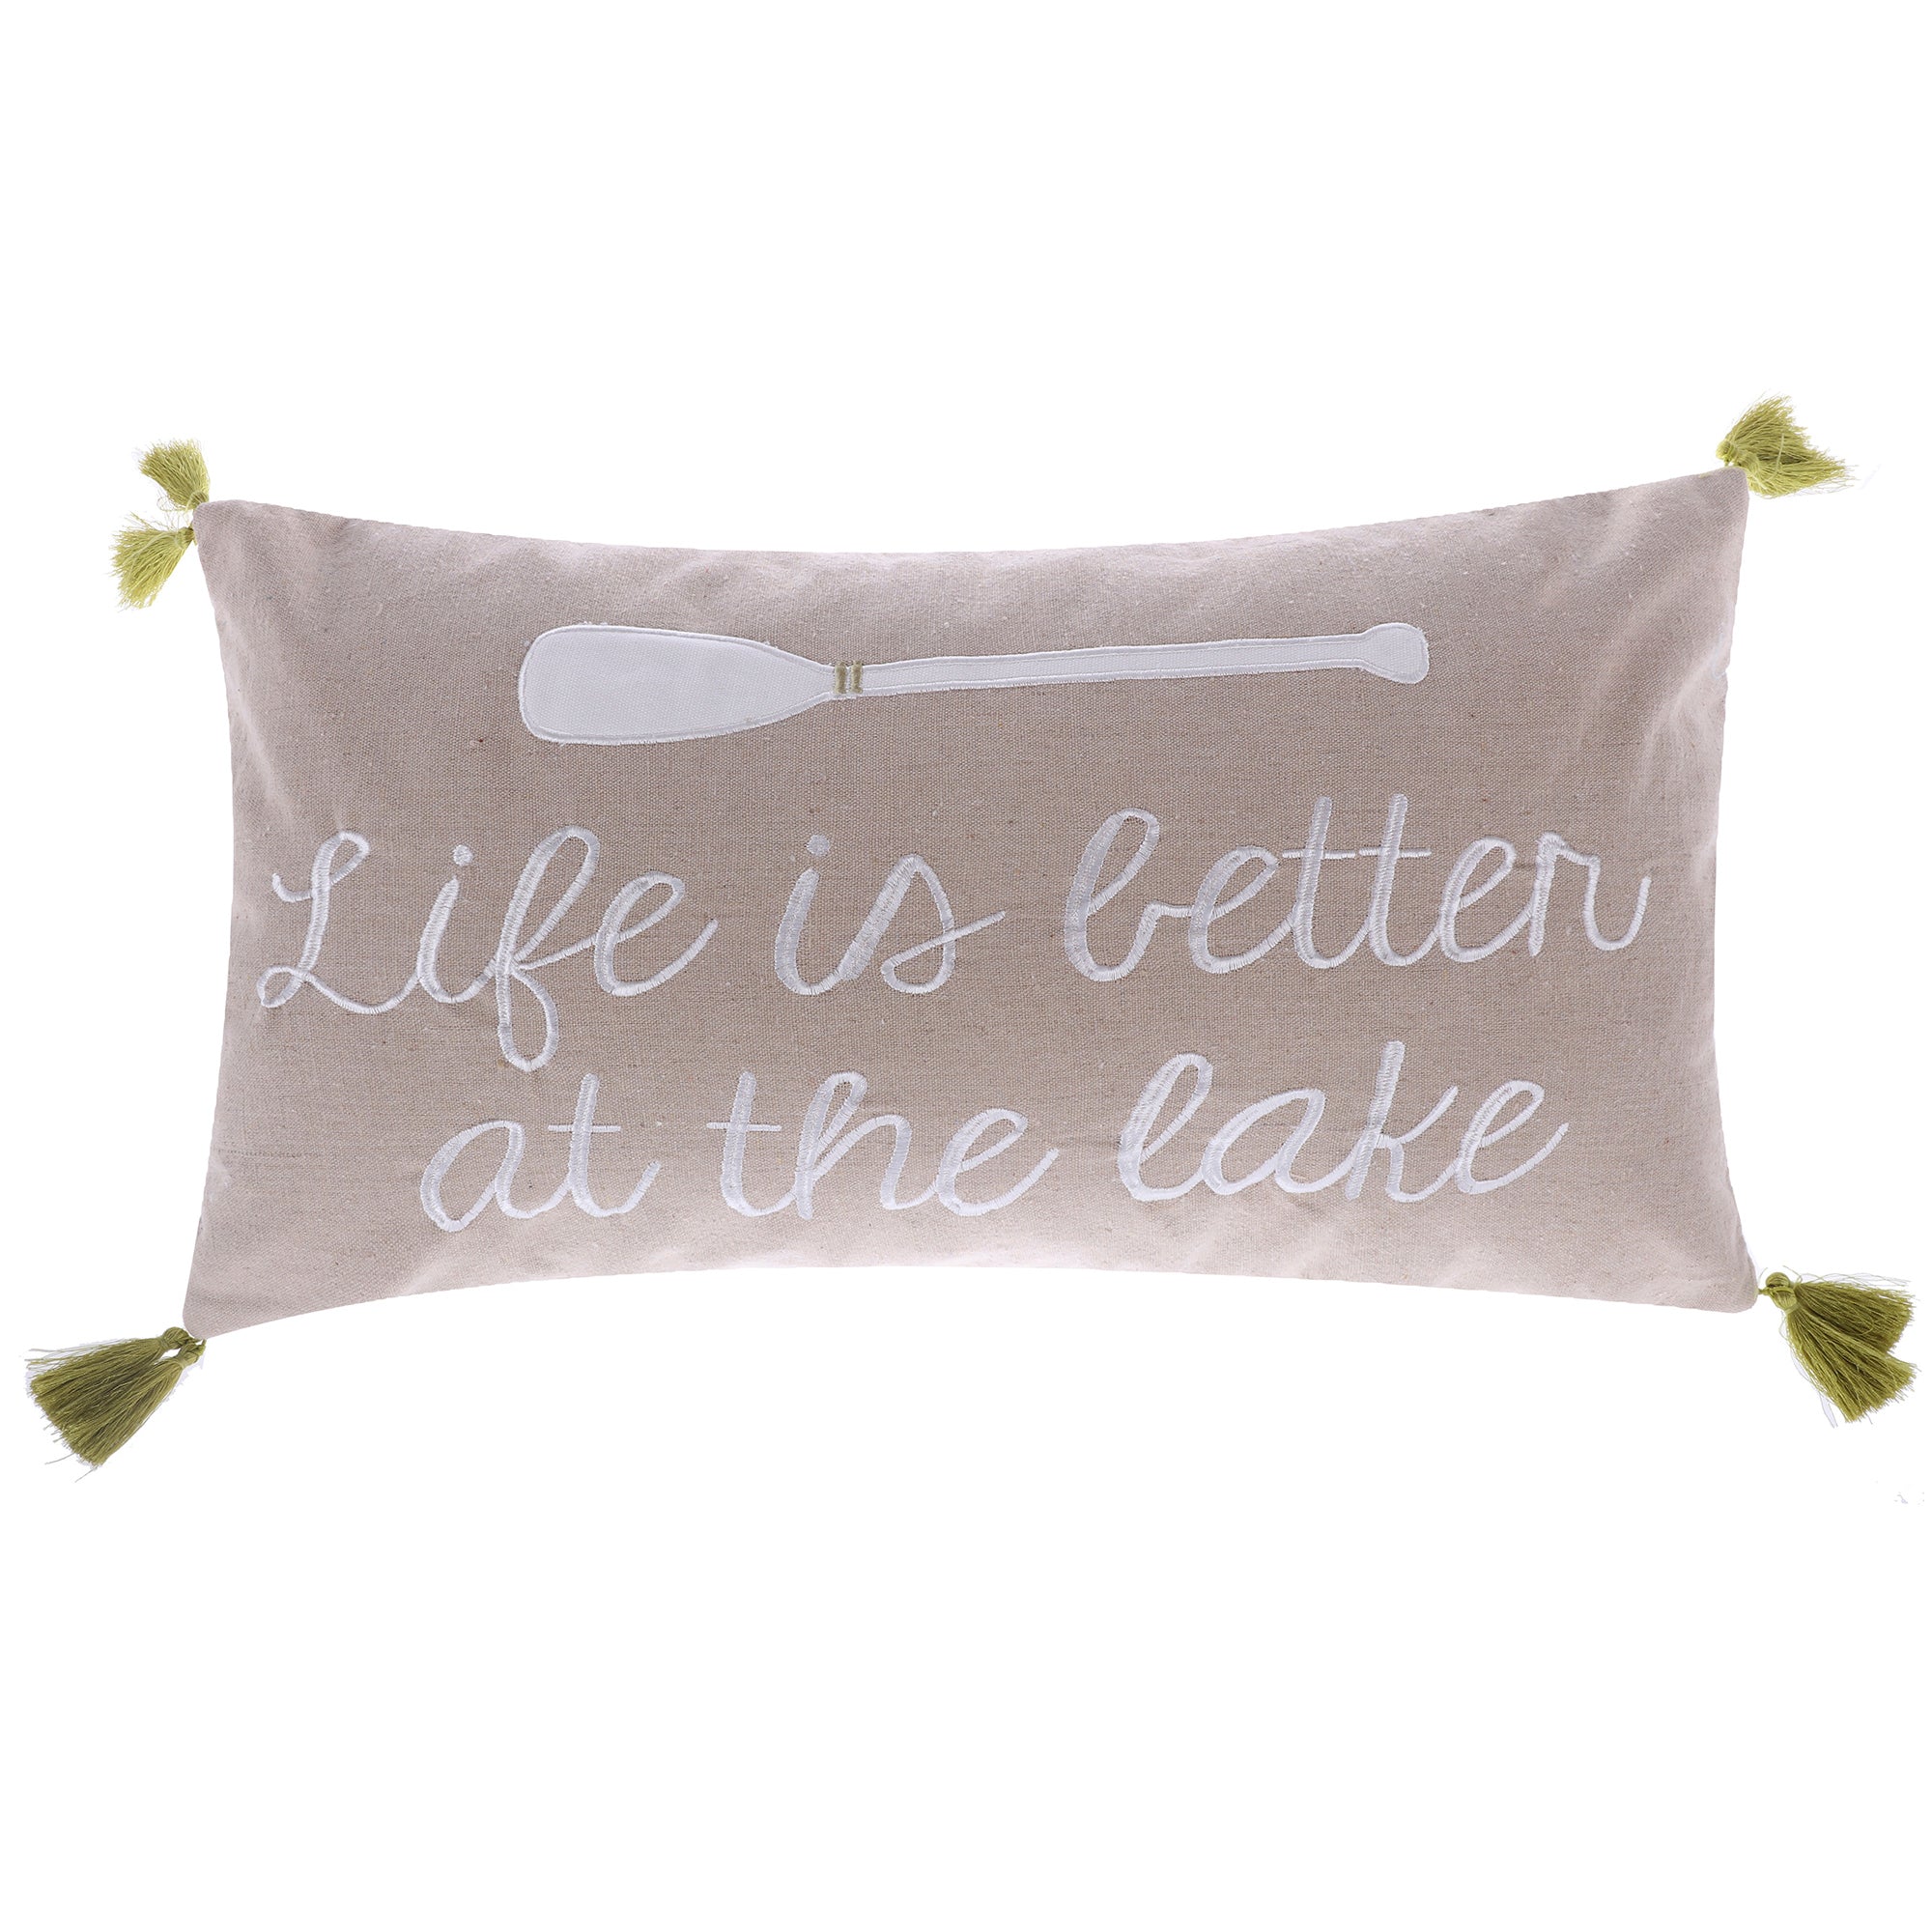 Life is Better Lake with Tassels Pillow